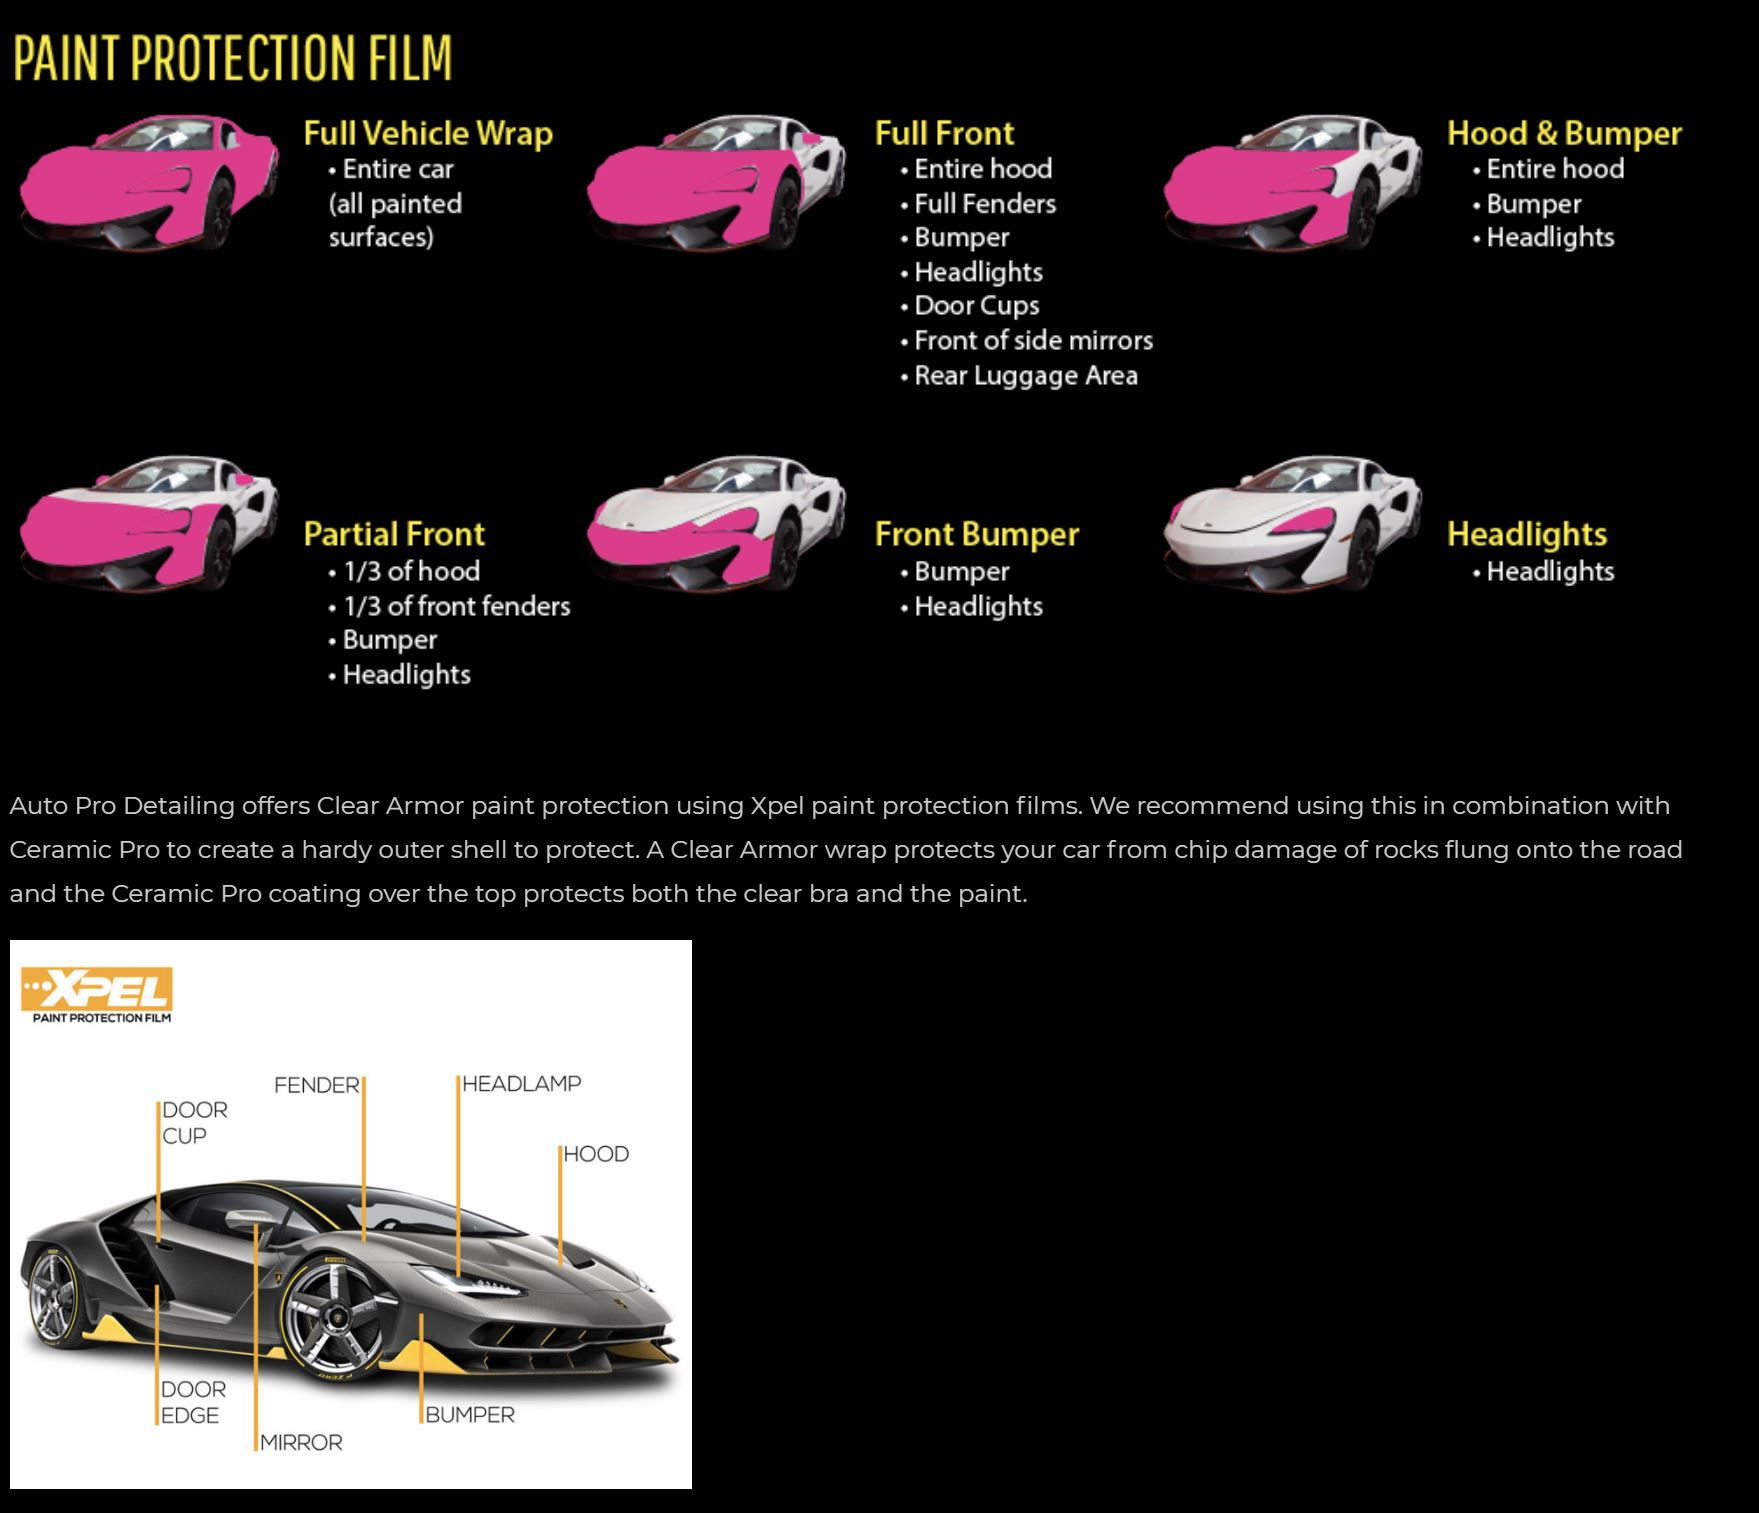 PPF (paint protection film) is truly an investment that can save